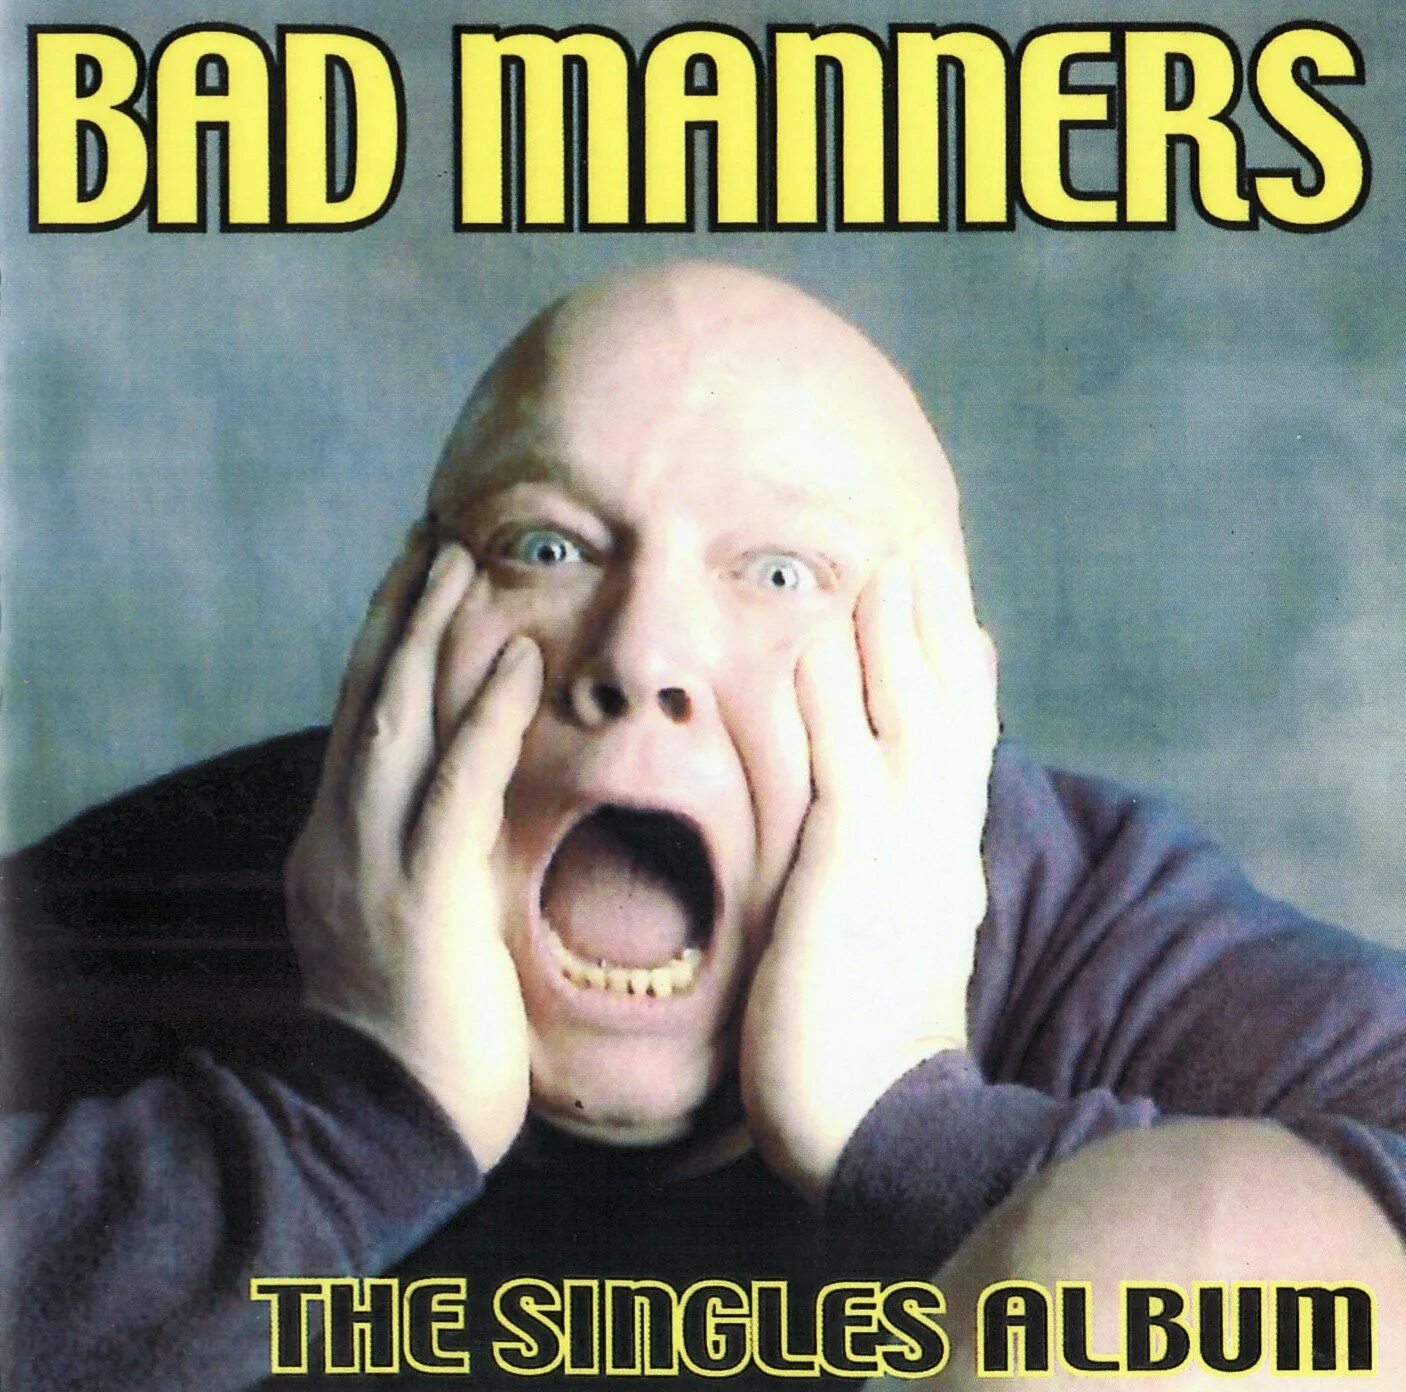 Bad manners. Группа Bad manners. Bad manners солист. Bad manners album. Flac more